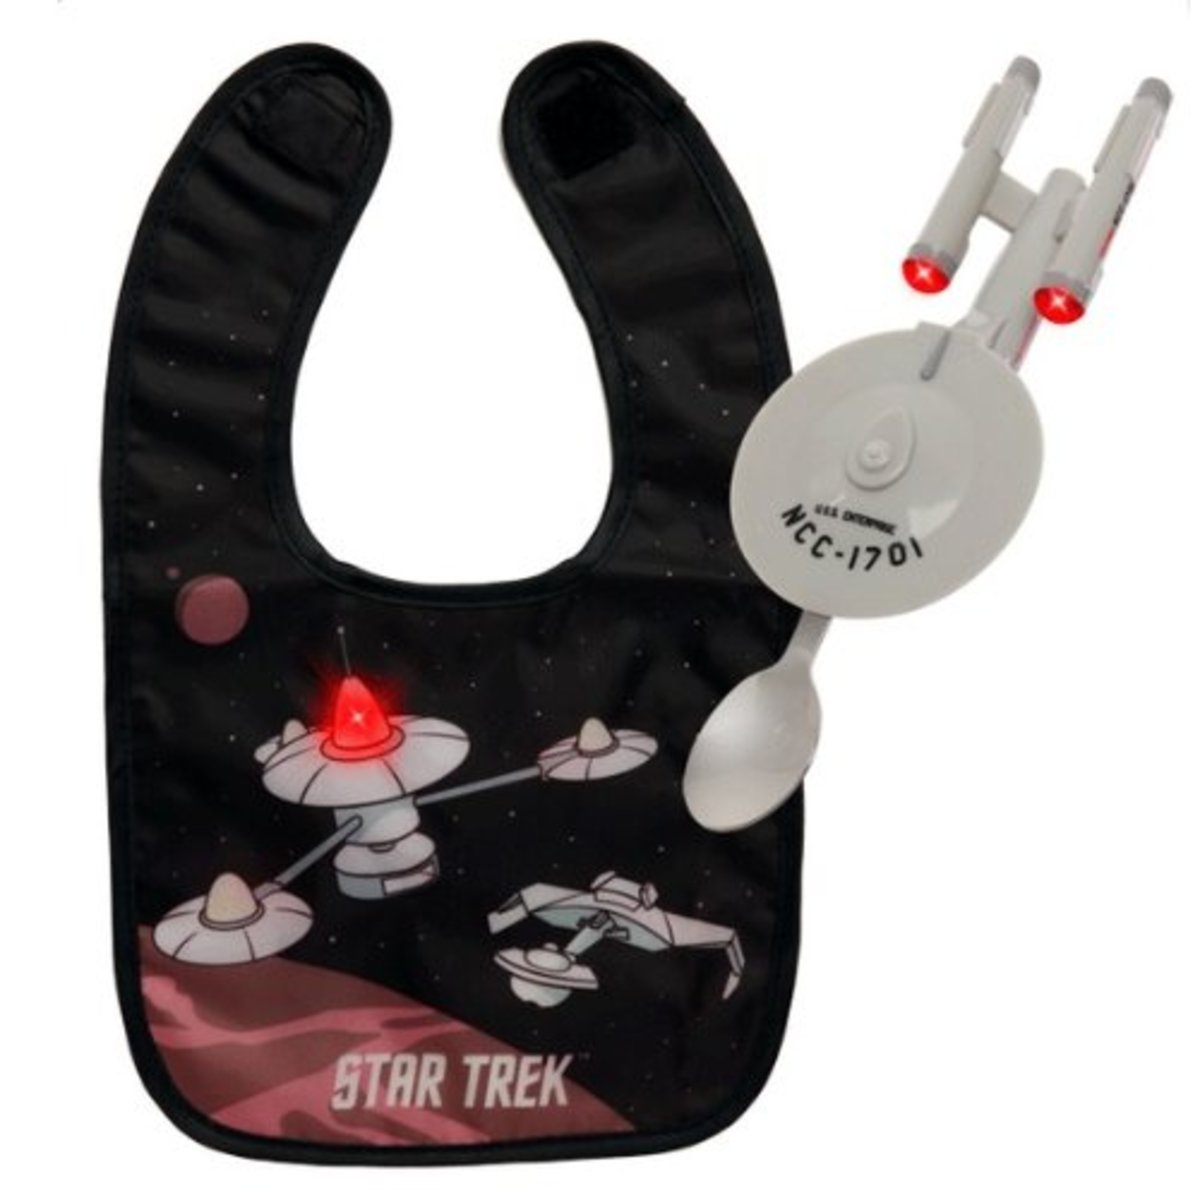 Light up bib and USS Enterprise baby spoon are the perfect gift ideas for a baby born into a Trekkie family